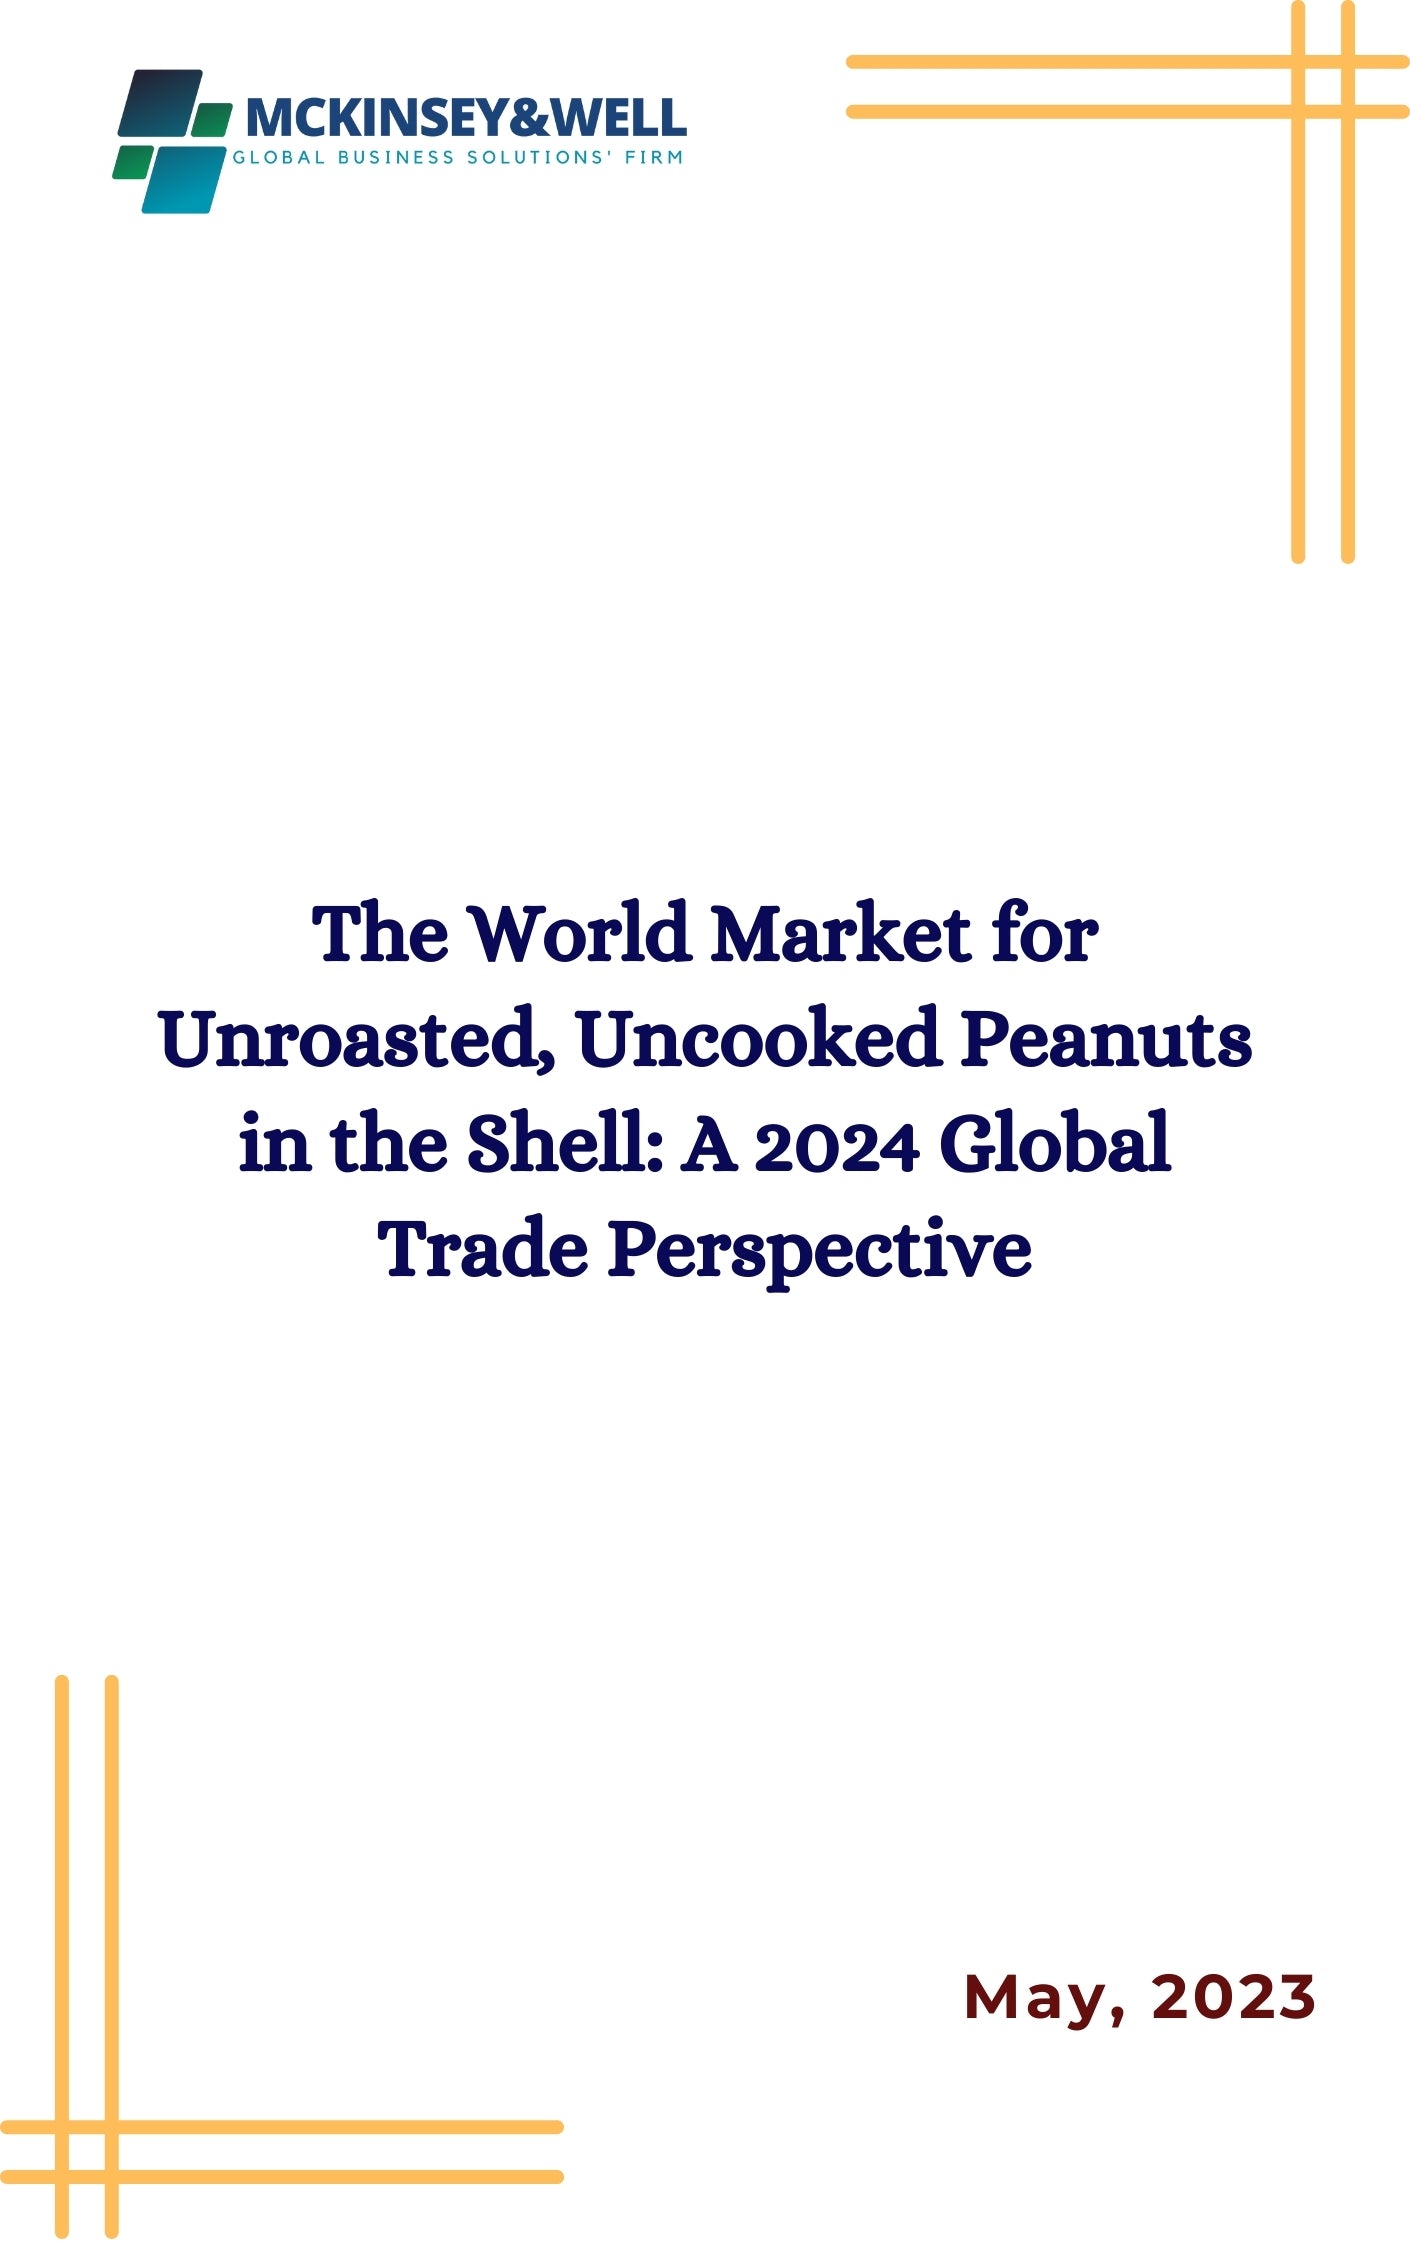 The World Market for Unroasted, Uncooked Peanuts in the Shell: A 2024 Global Trade Perspective